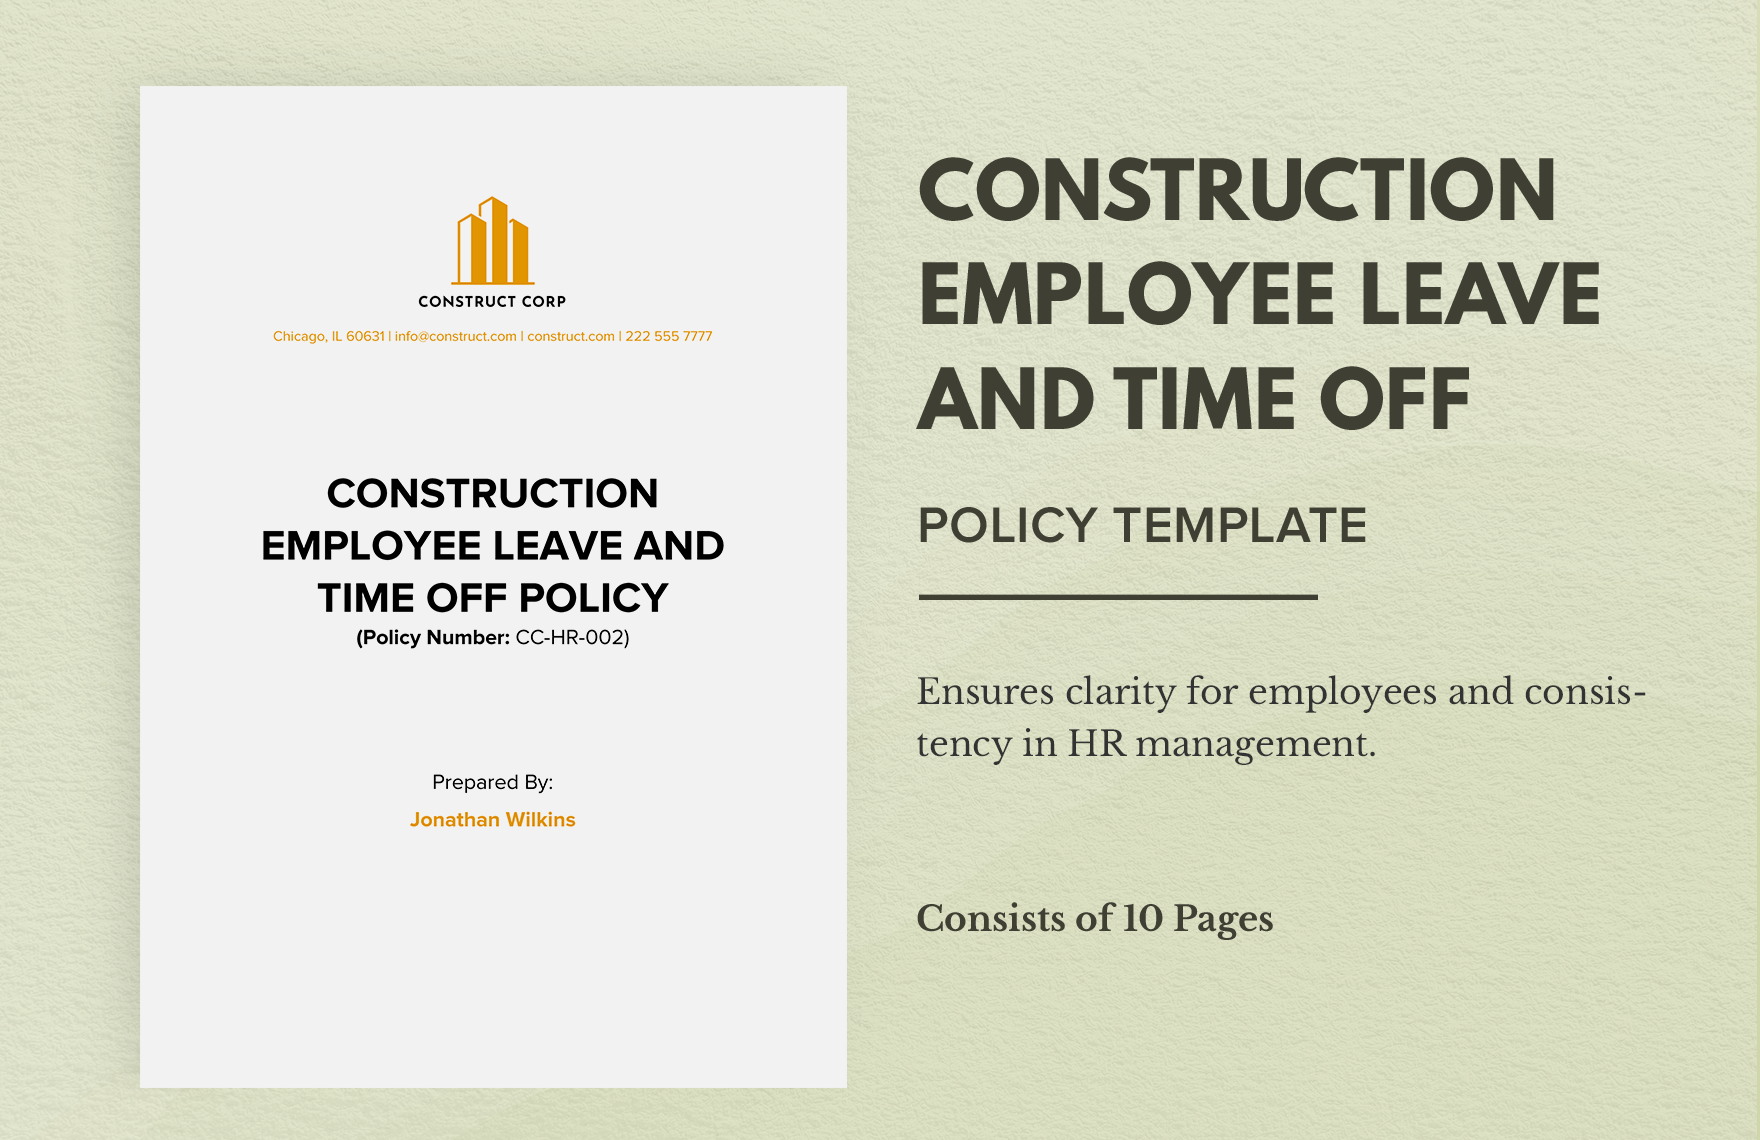 Construction Employee Leave and Time Off Policy Template